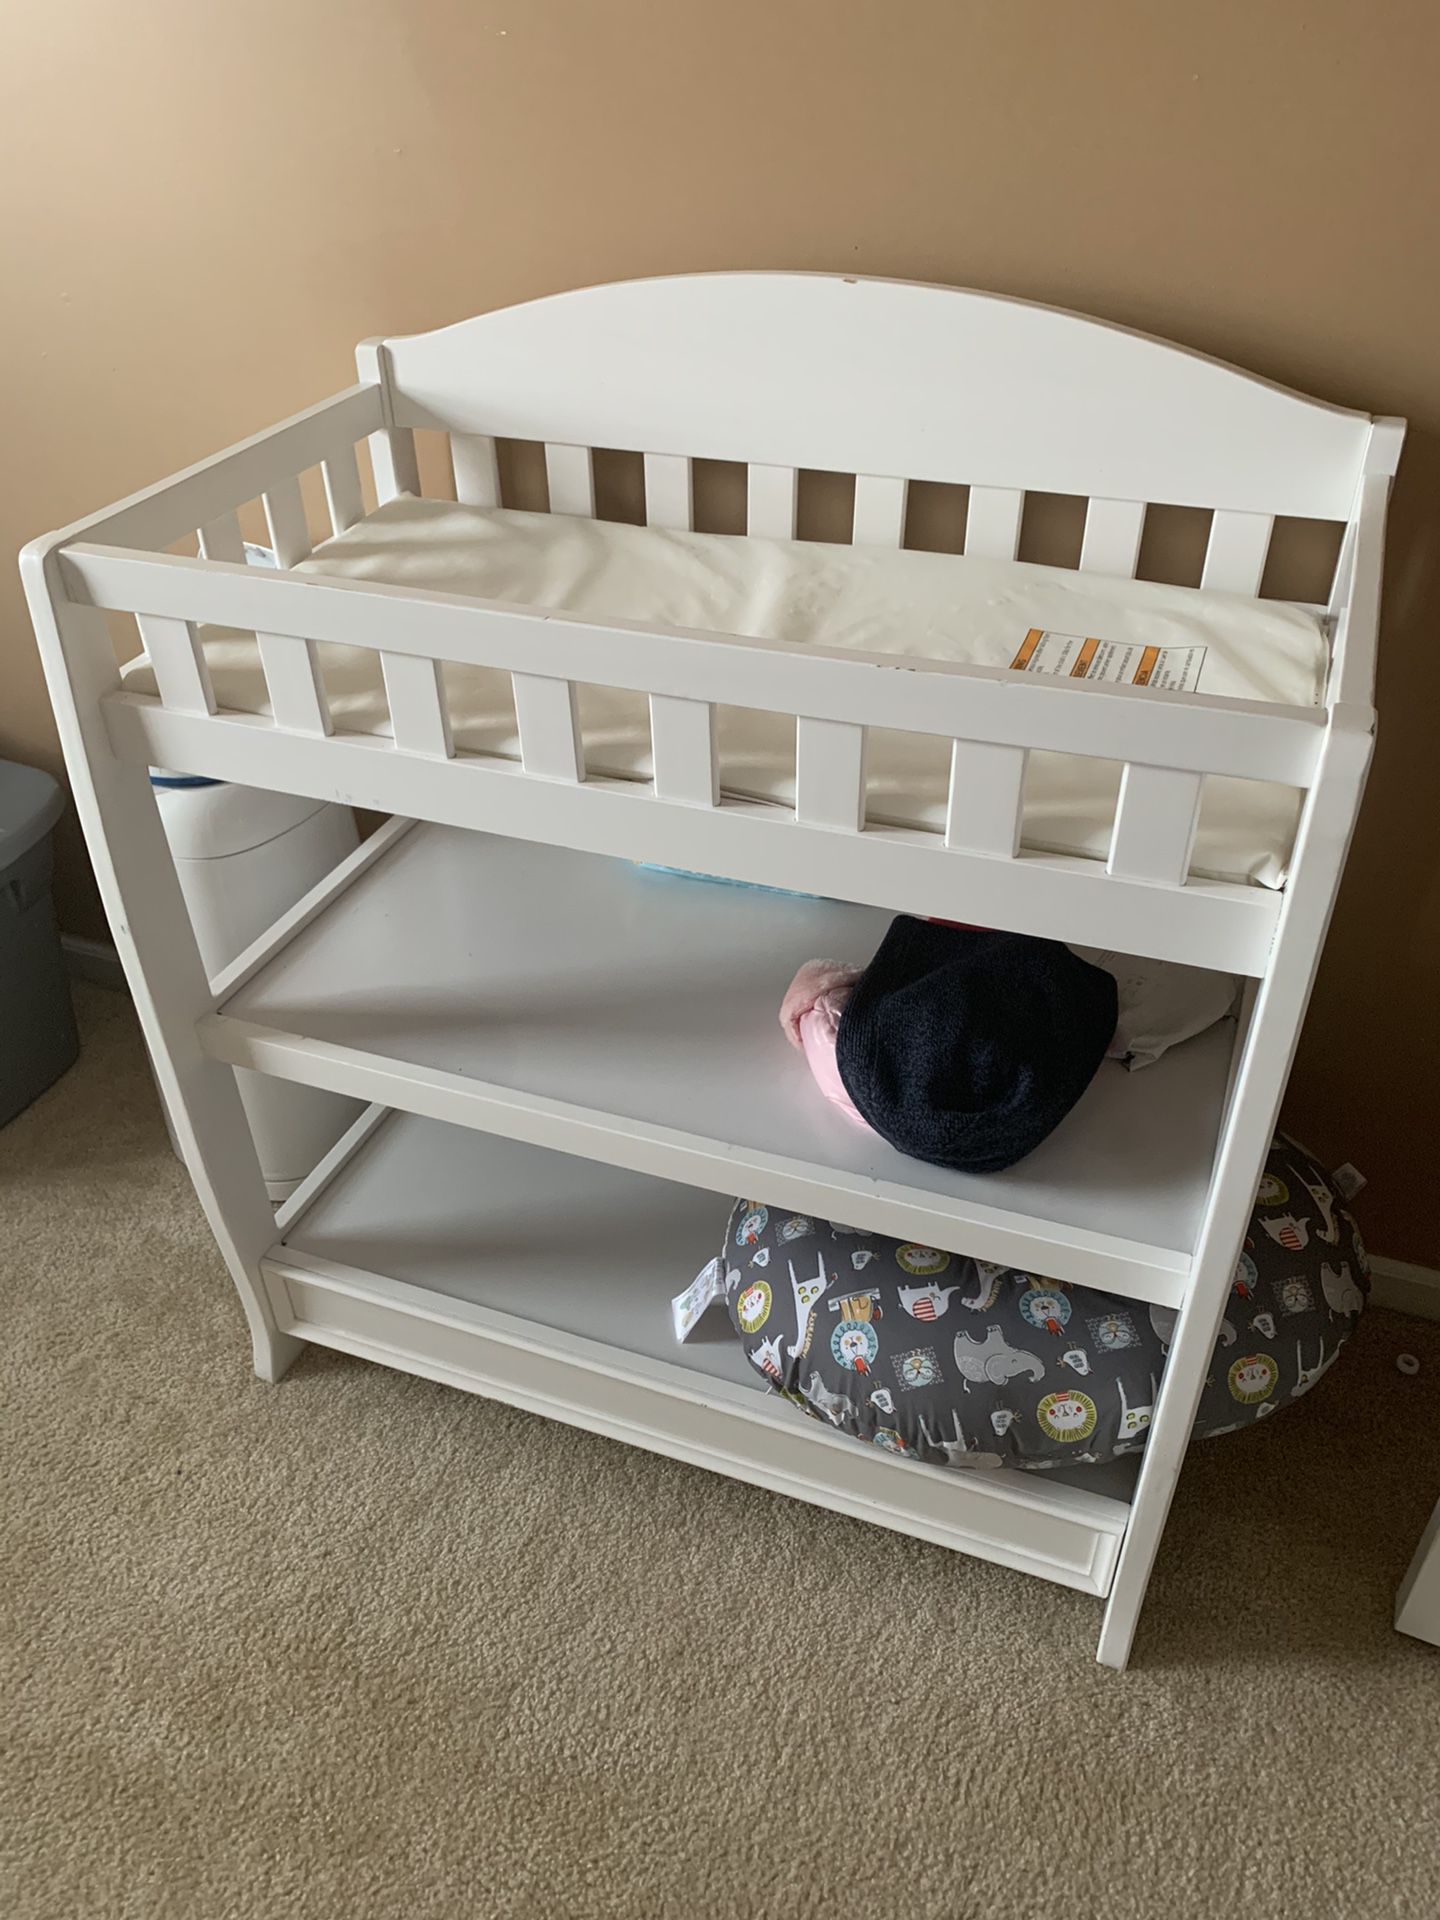 Graco changing table